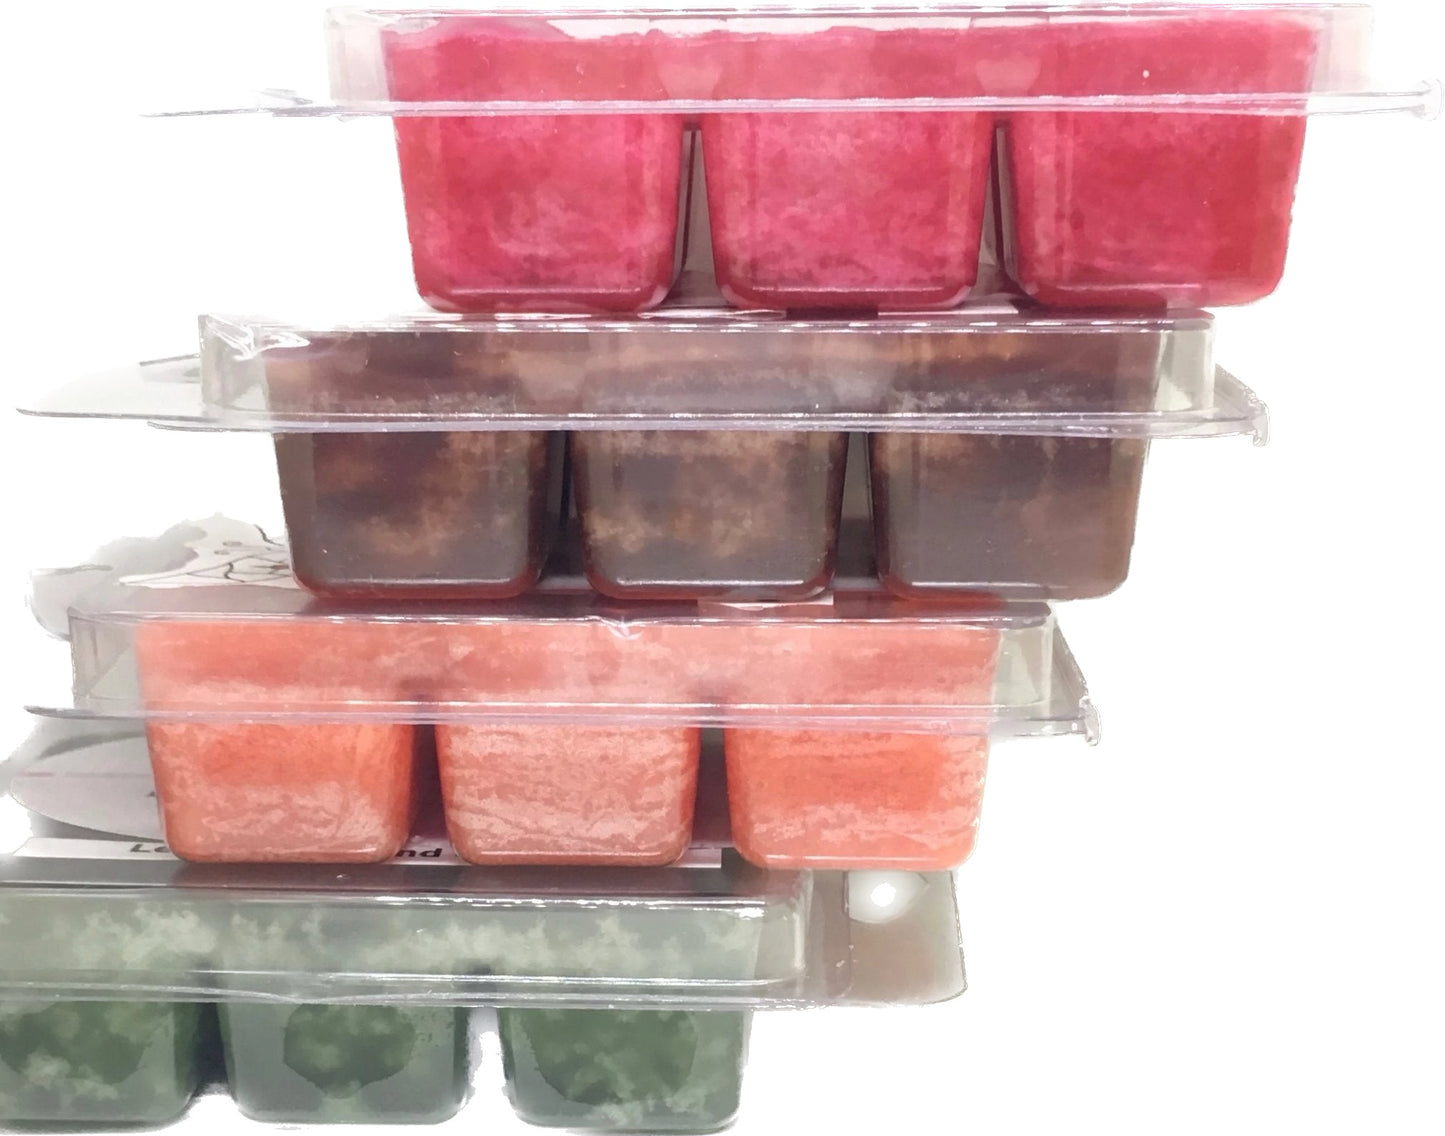 Scented Wax Melts/Cubes in a Clamshell Mold